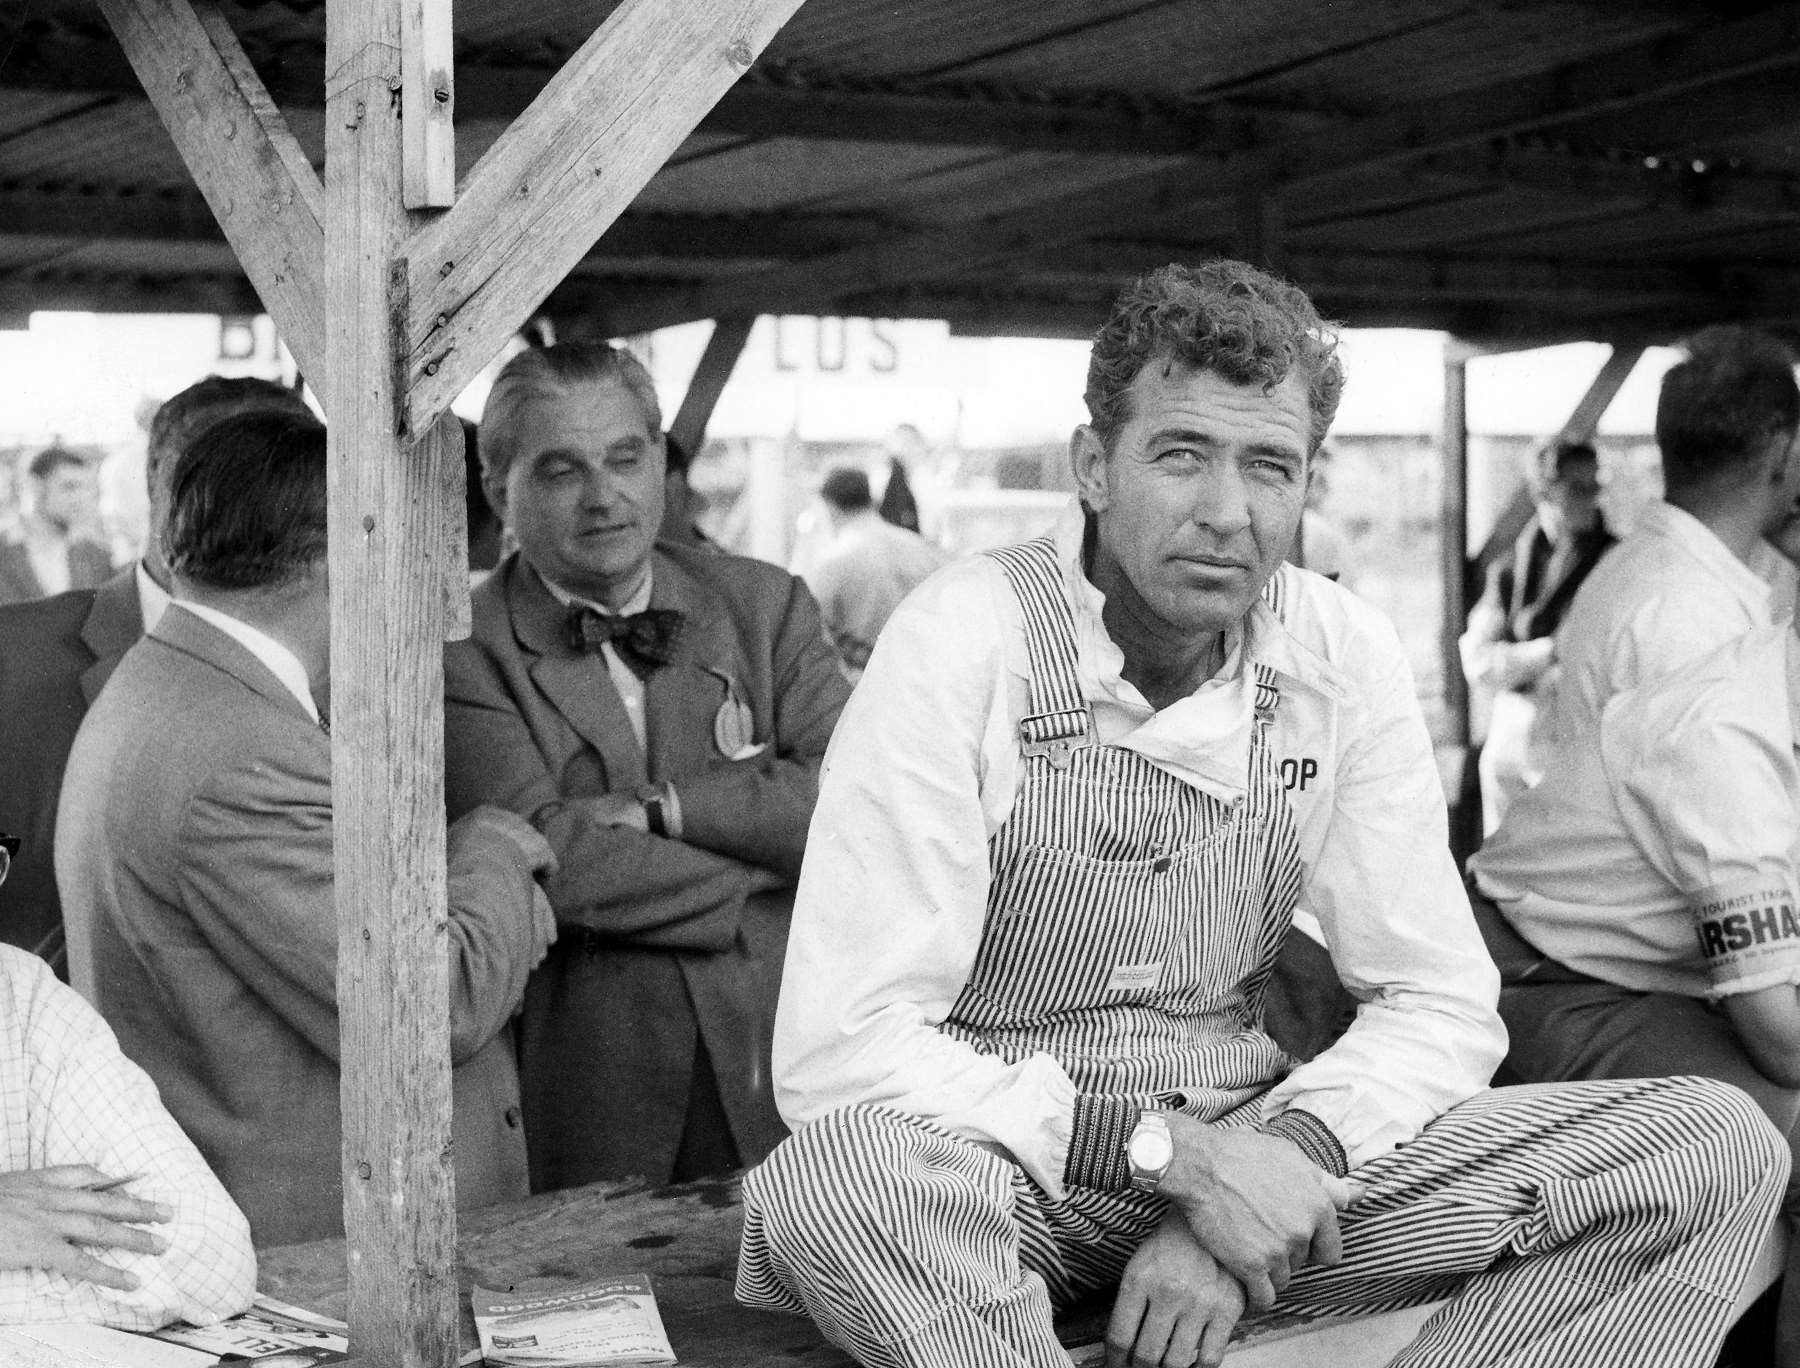 carroll-shelby-pictured-at-the-goodwood-motor-circuit-in-1959.-ph.-by-gpl..jpg